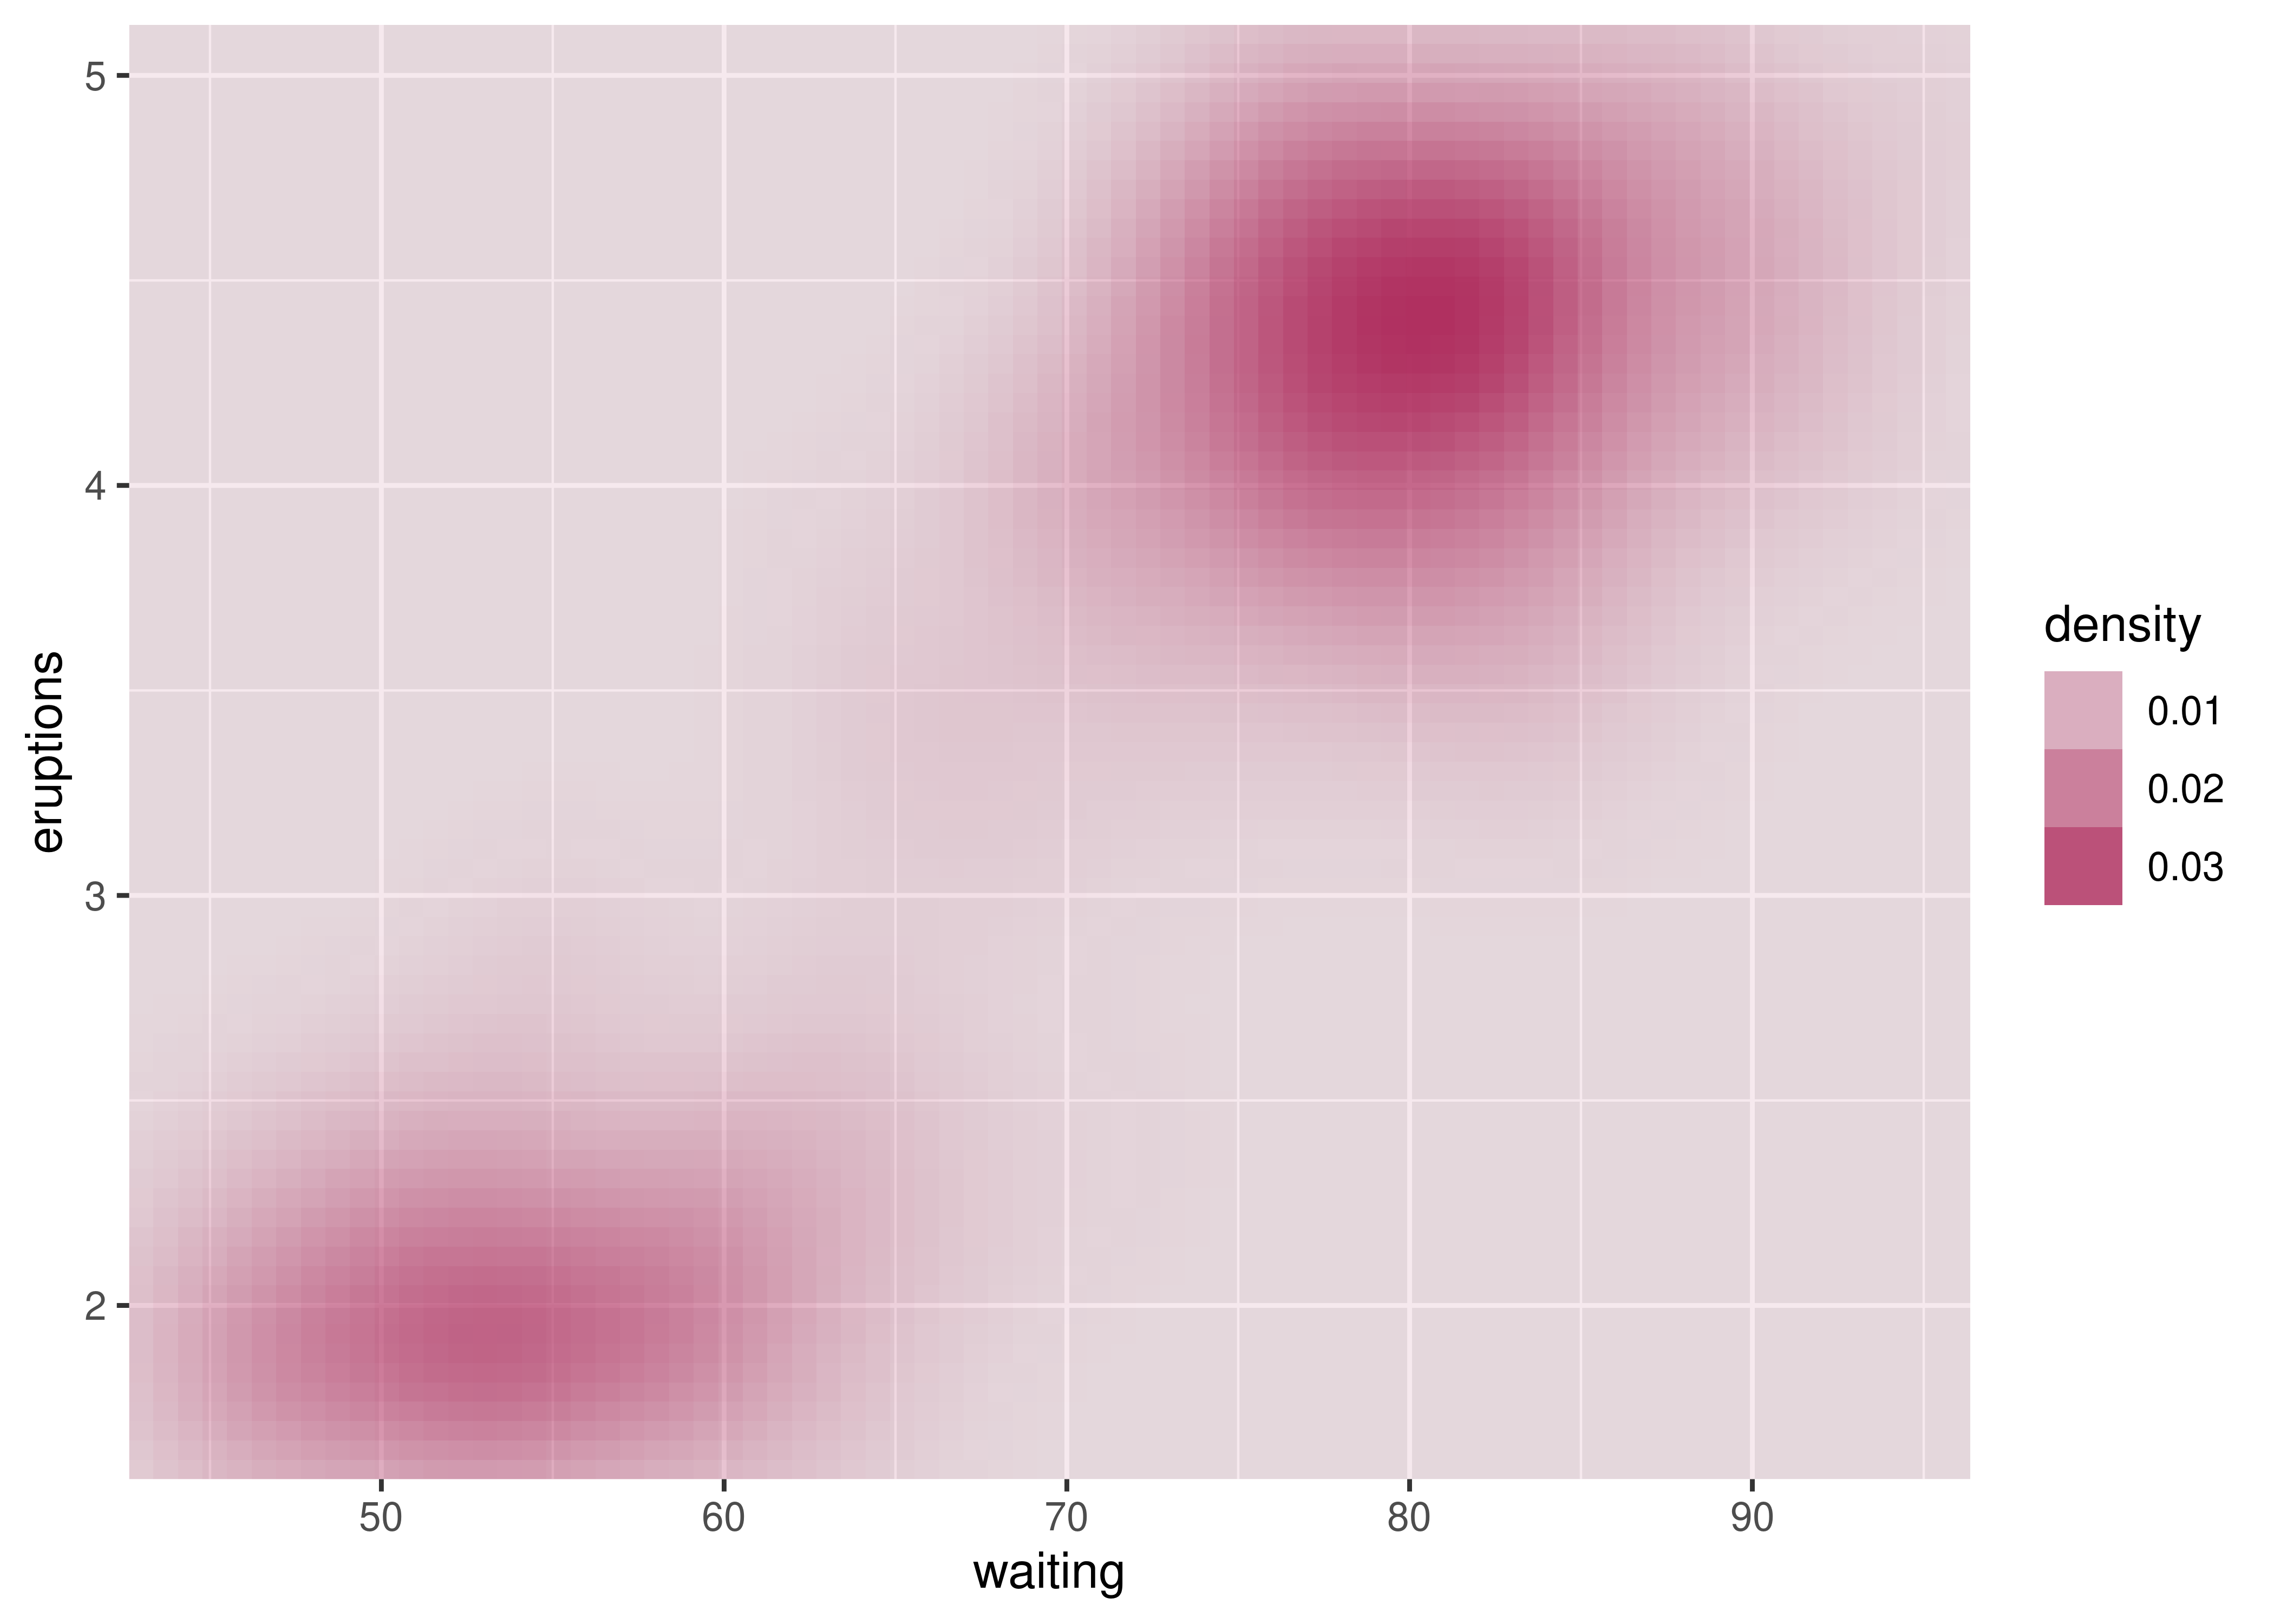 https://ggplot2-book.org/scales-colour_files/figure-html/unnamed-chunk-46-1.png